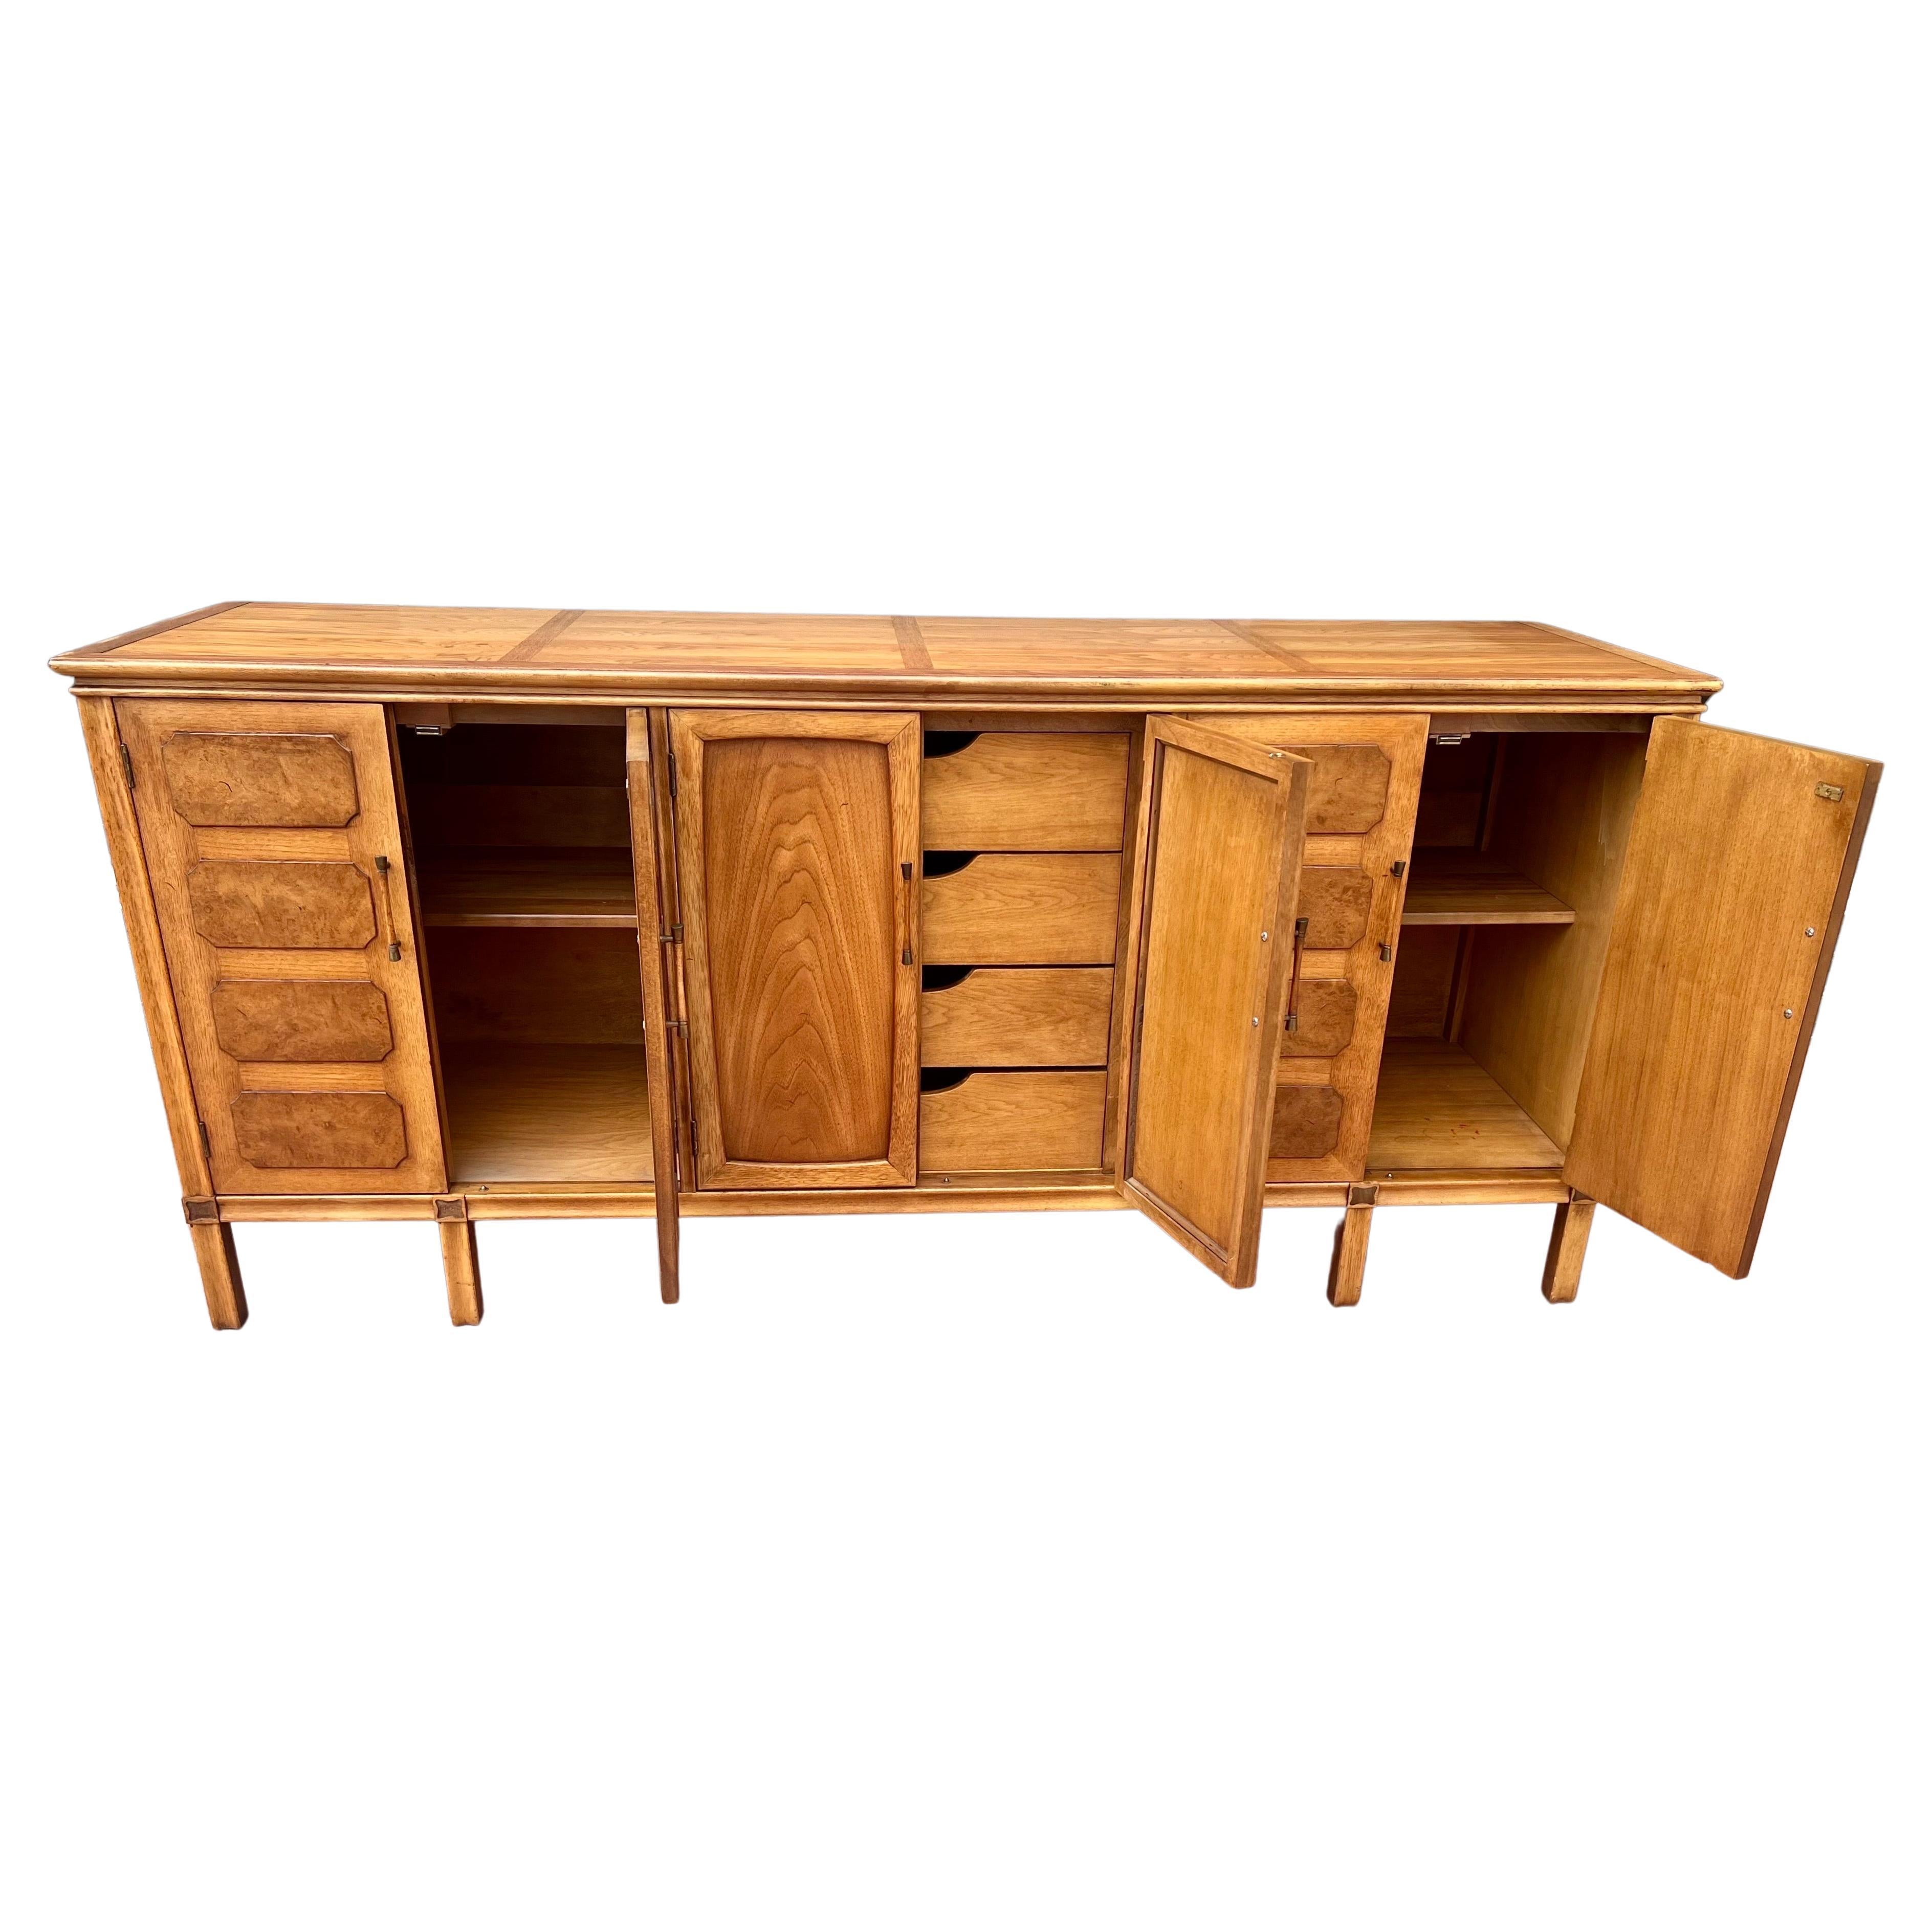 Elegant beautiful credenza by Thomasville part of the Timeline, circa 1960's nice brass accents with olive burl wood and a pecan/walnut finish we have oiled and cleaned the piece very nice original finish and condition.beautiful handles lots of